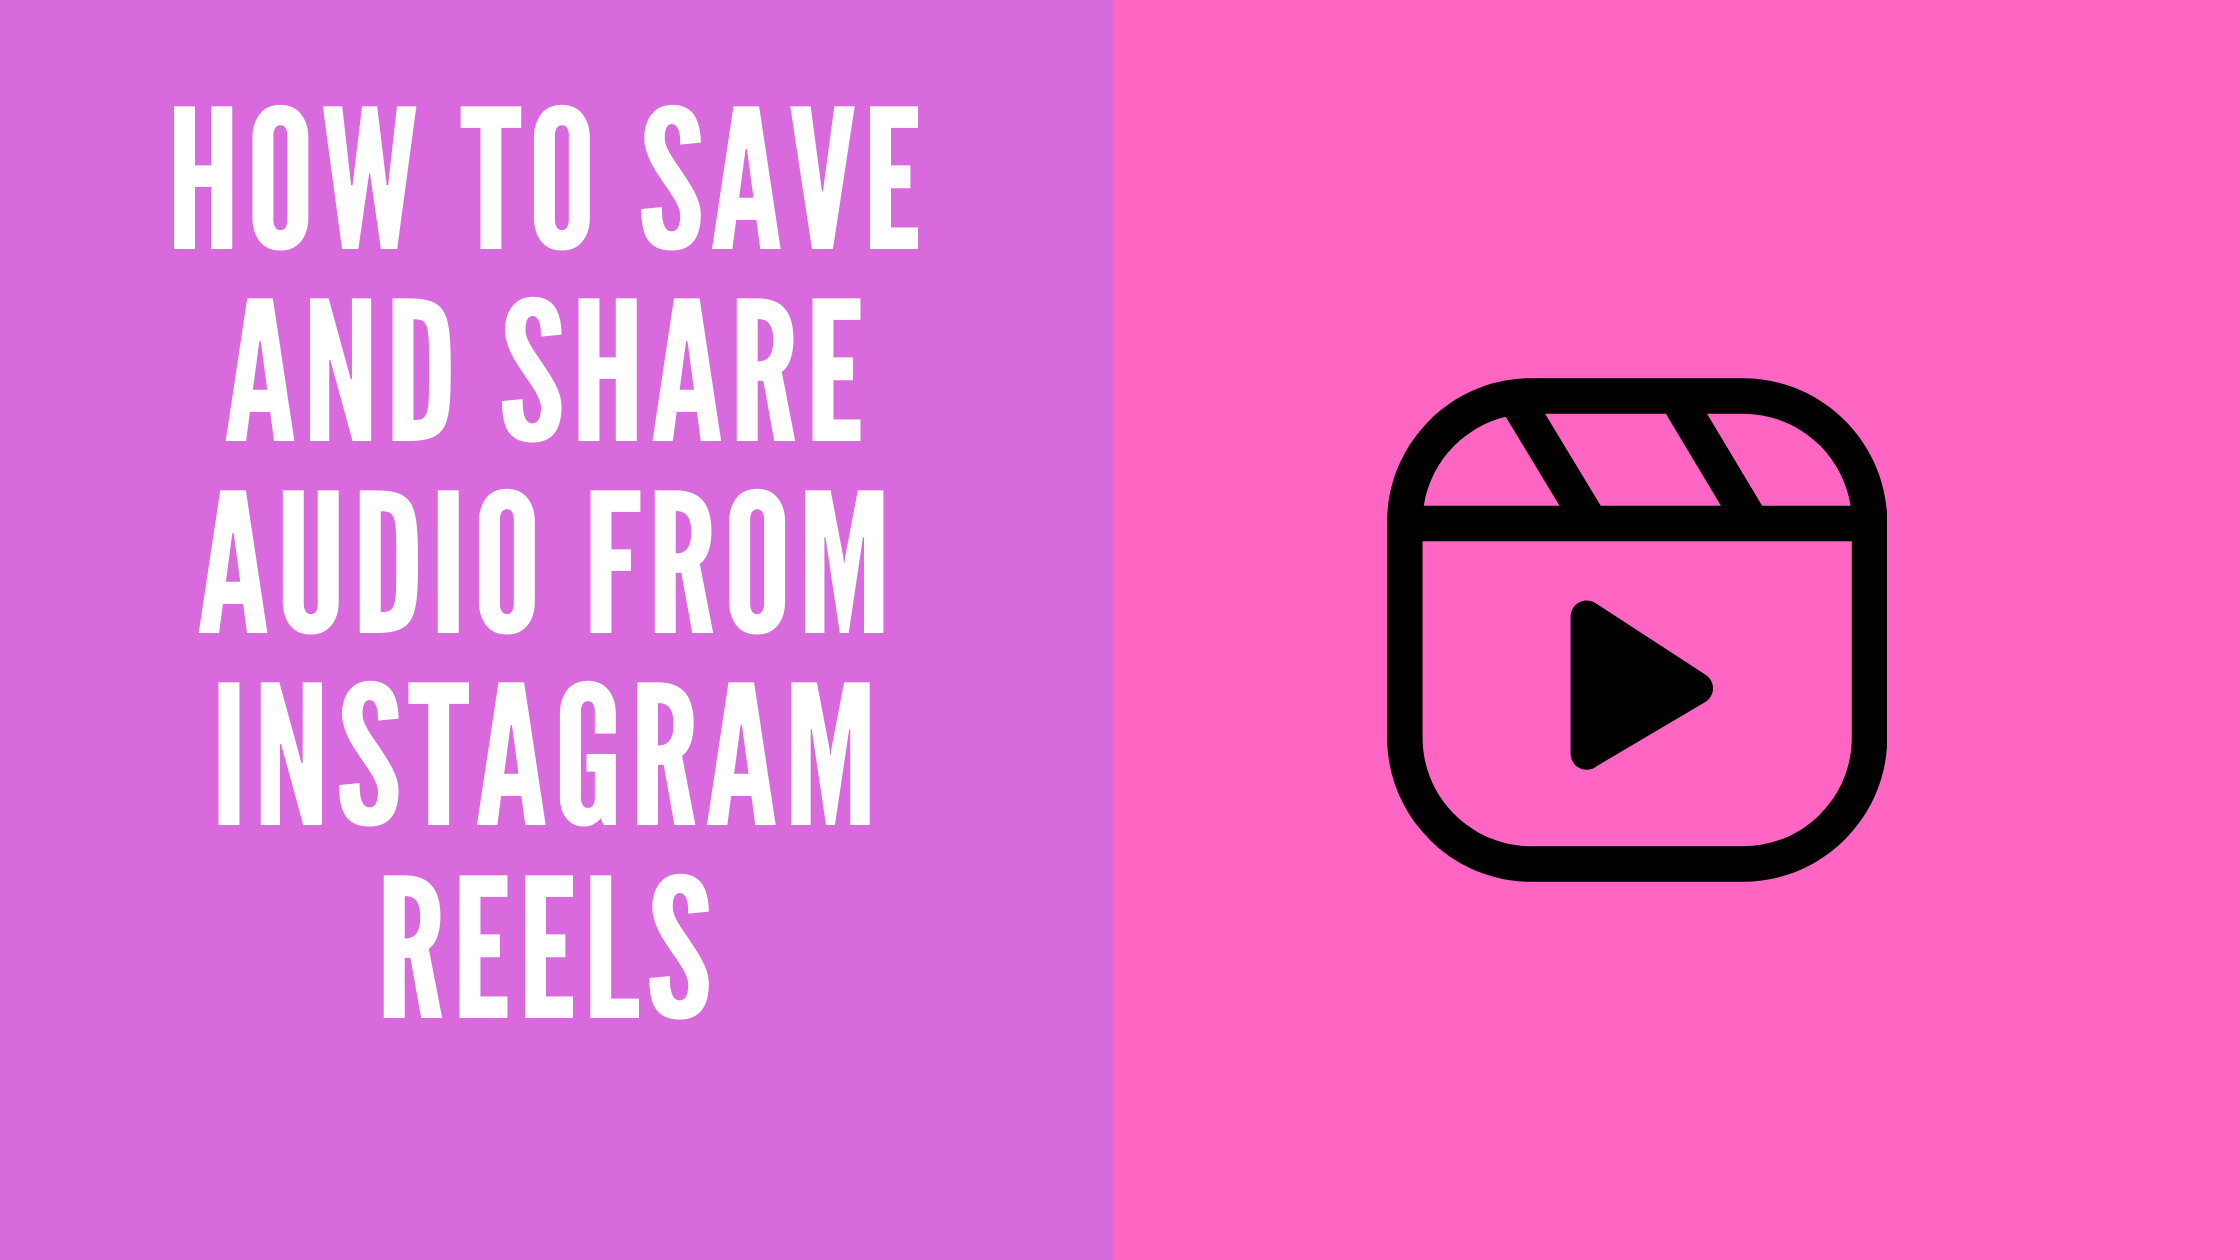 How To Save and Share Audio From Instagram Reels